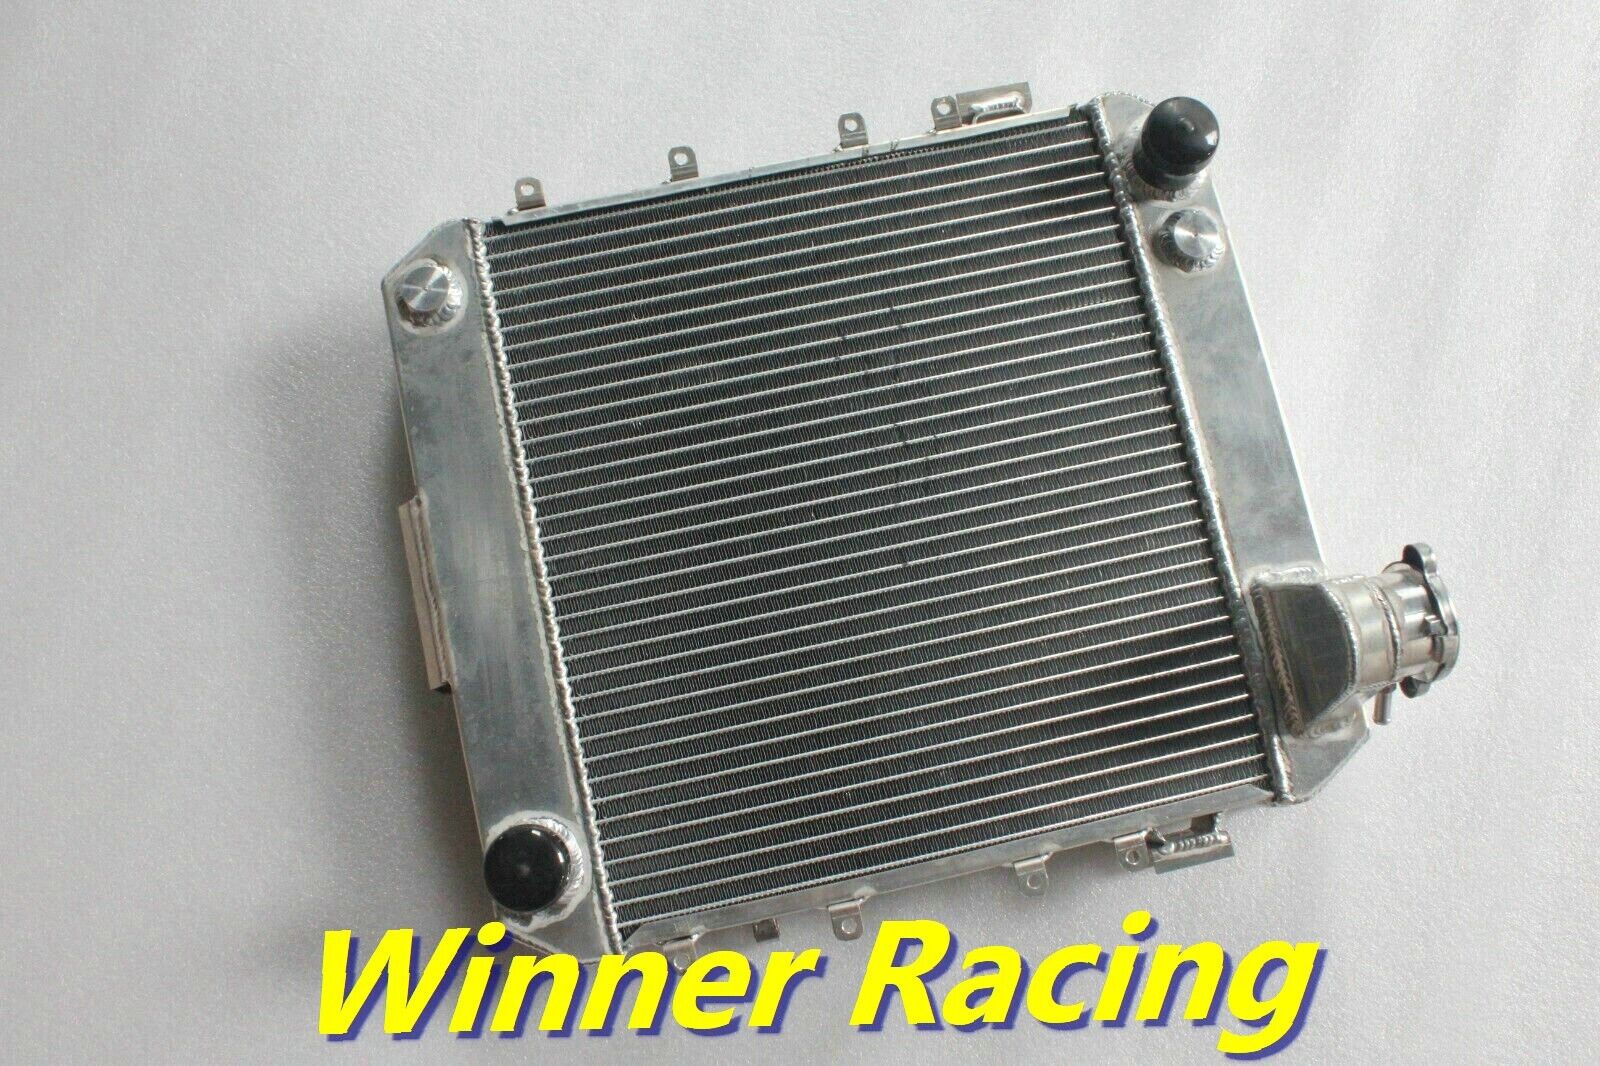 1302078 Aluminum Radiator Fit Opel GT 1.9L 19 S Coupe 1968-1973